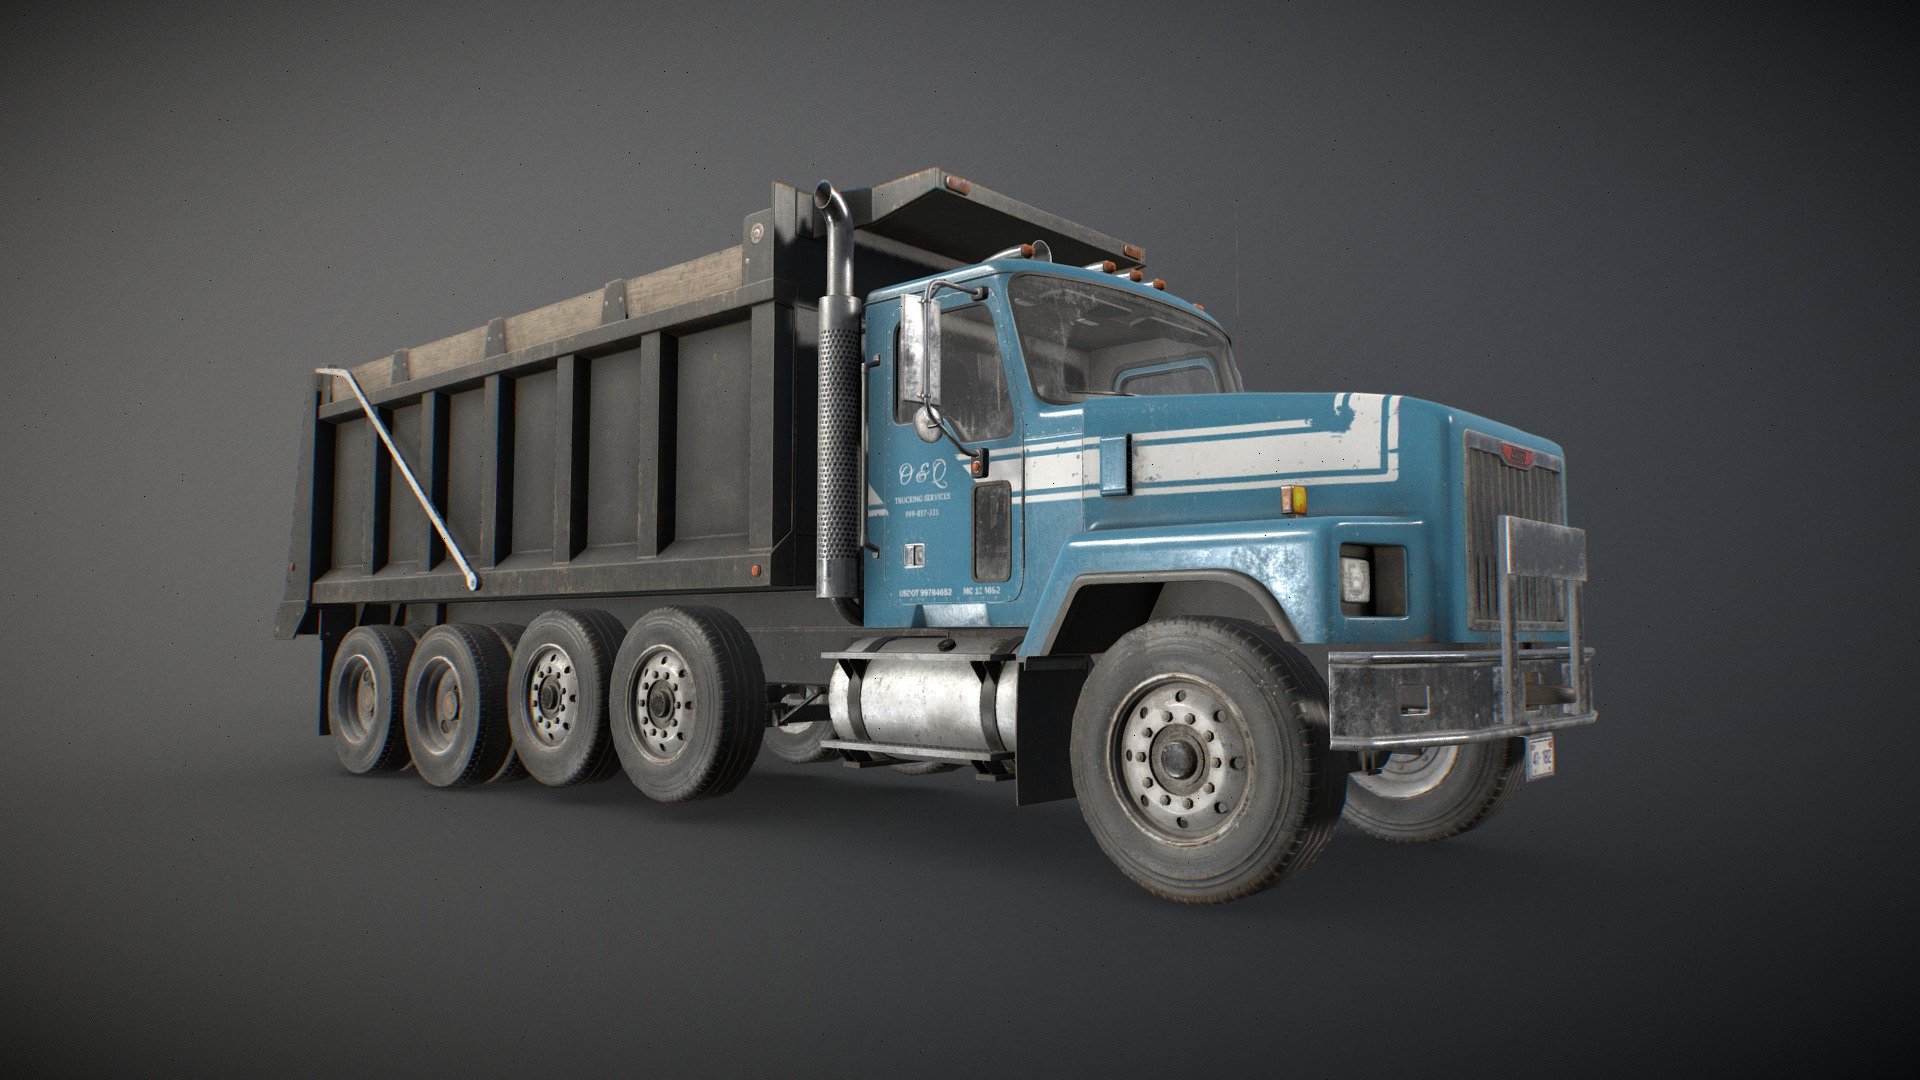 Low Poly 3D model of a generic Classic Dump Truck:




2 color variations included for dump box.

Doors, wheels, steering wheel, dump box, soil, and cover are separated and can be easily removed or rigged/animated (model not animated).

3 versions included: Empty, Full and Covered

PBR textures made in Substance Painter

All branding and labels are custom made.

Model also compatible with other &ldquo;Classic Truck